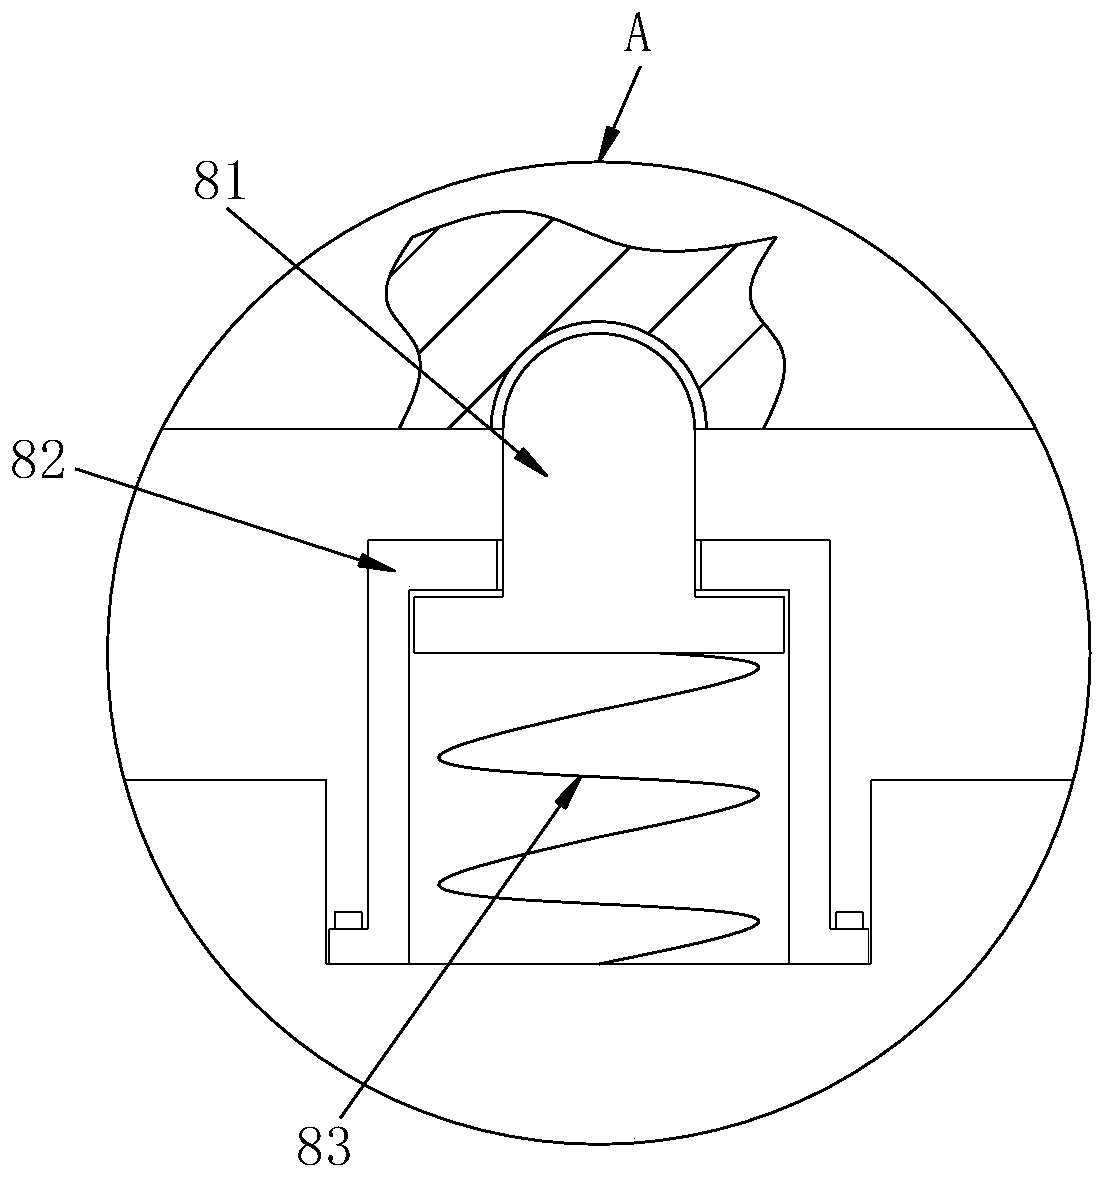 Location-welding all-in-one machine for electrical apparatus element pins of assembled circuit board